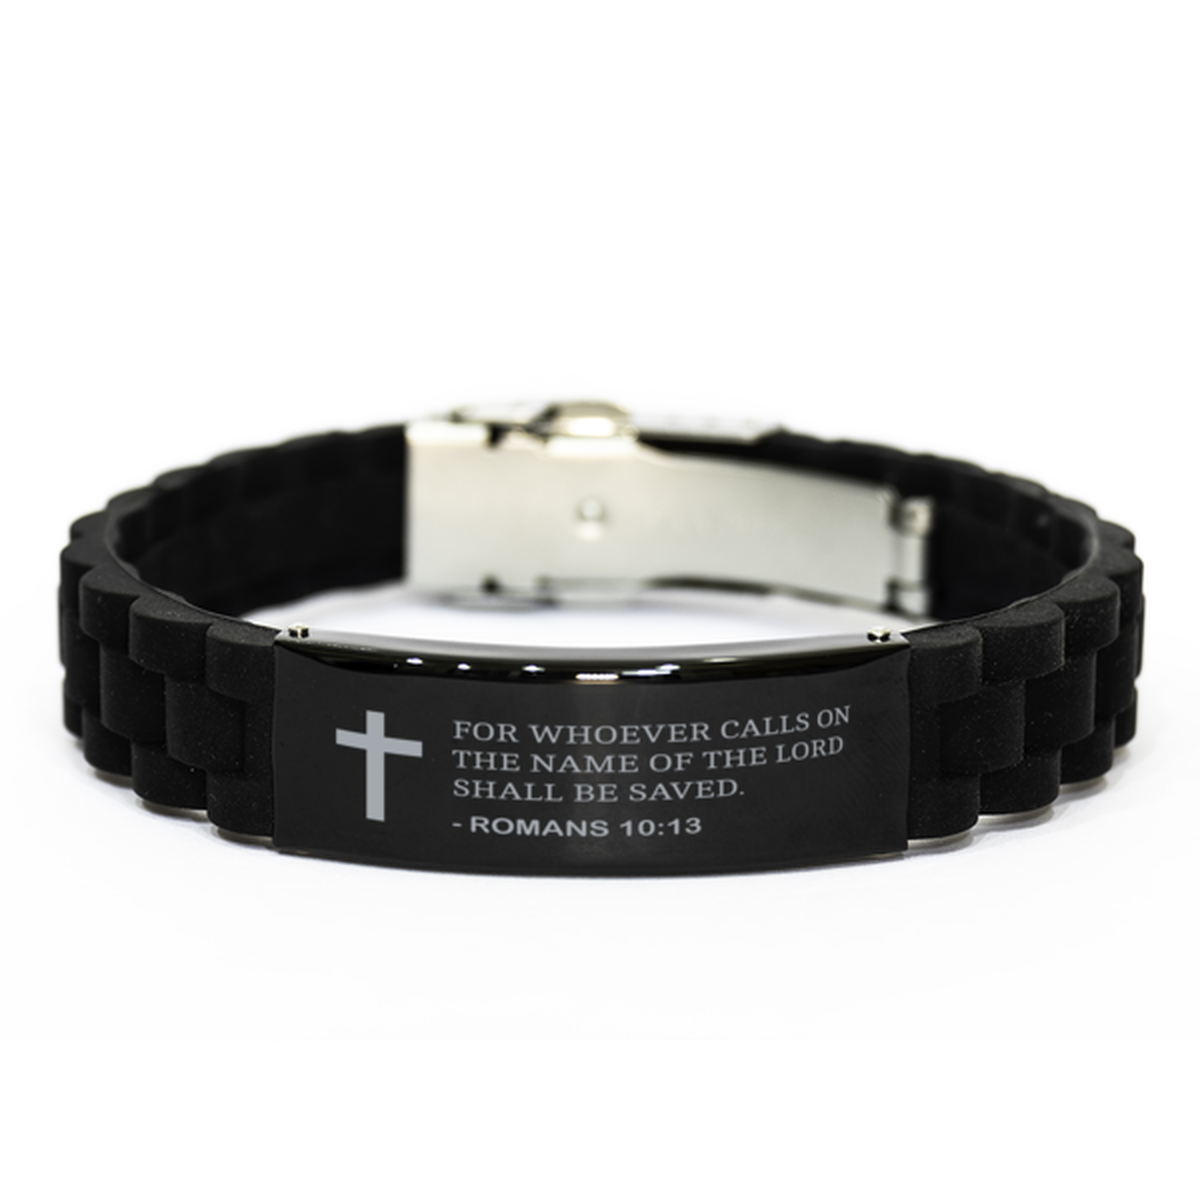 Bible Verse Black Bracelet,, Romans 10:13 For Whoever Calls On The Name Of The Lord Shall, Inspirational Christian Gifts For Men Women